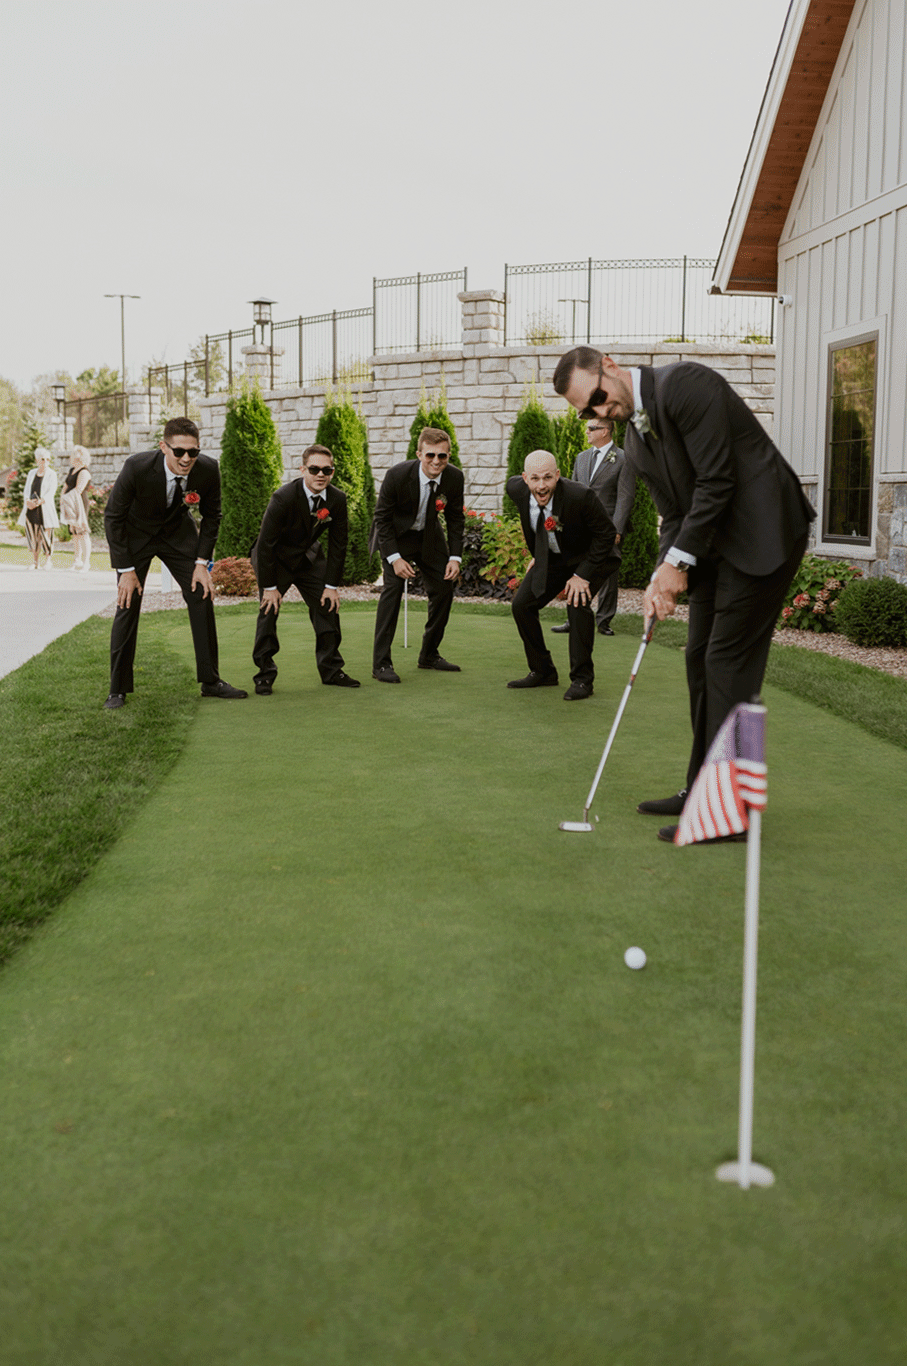 The groomsmen cheer on the groom as he attempts a putt.